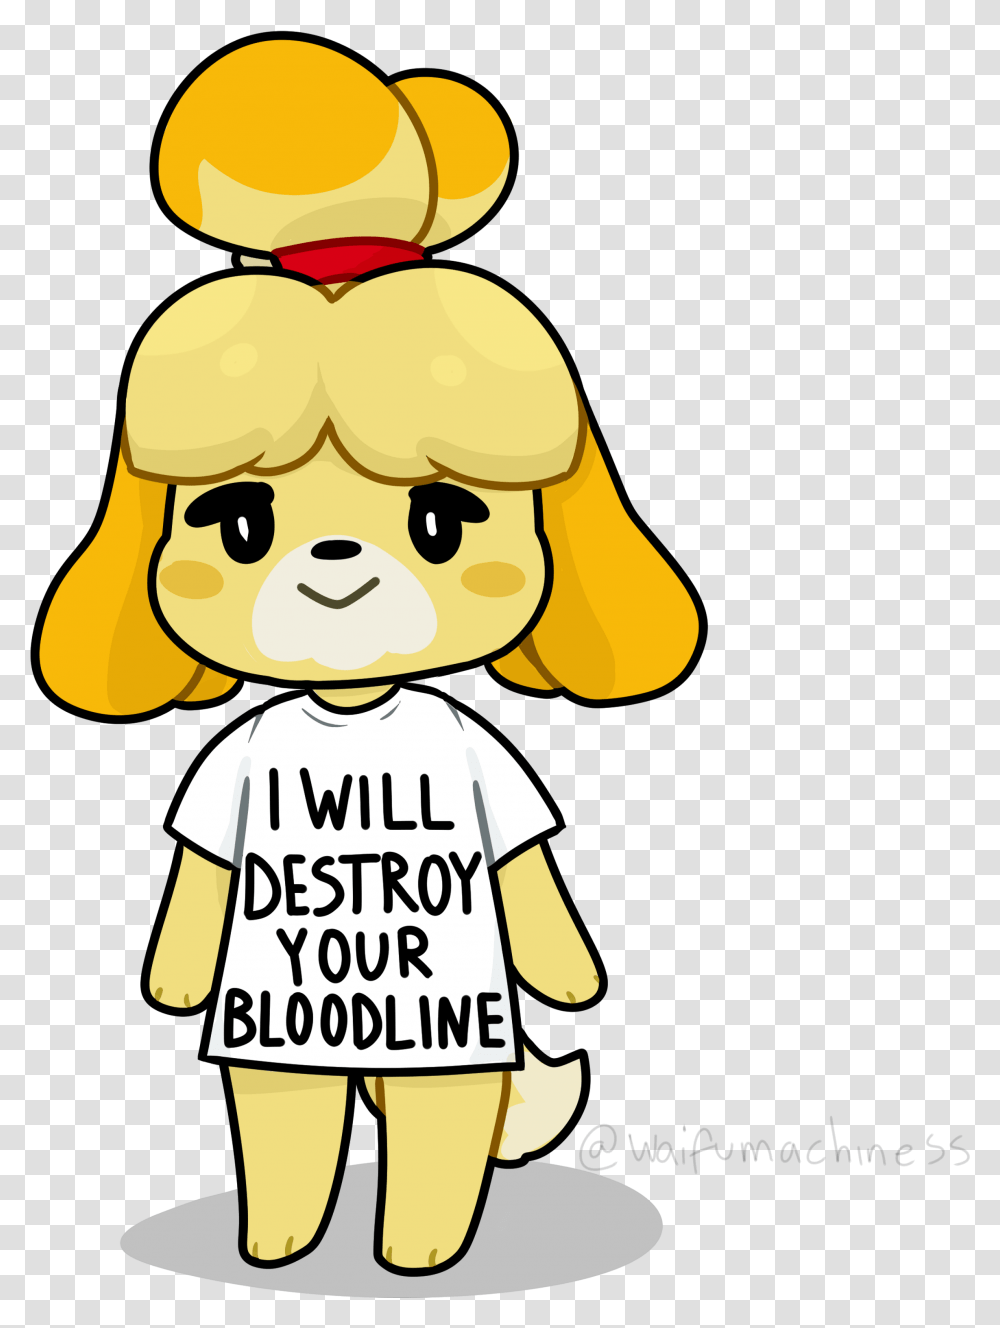 I Will Destroy Your Bloodline Waipumachiness Cartoon, Word Transparent Png